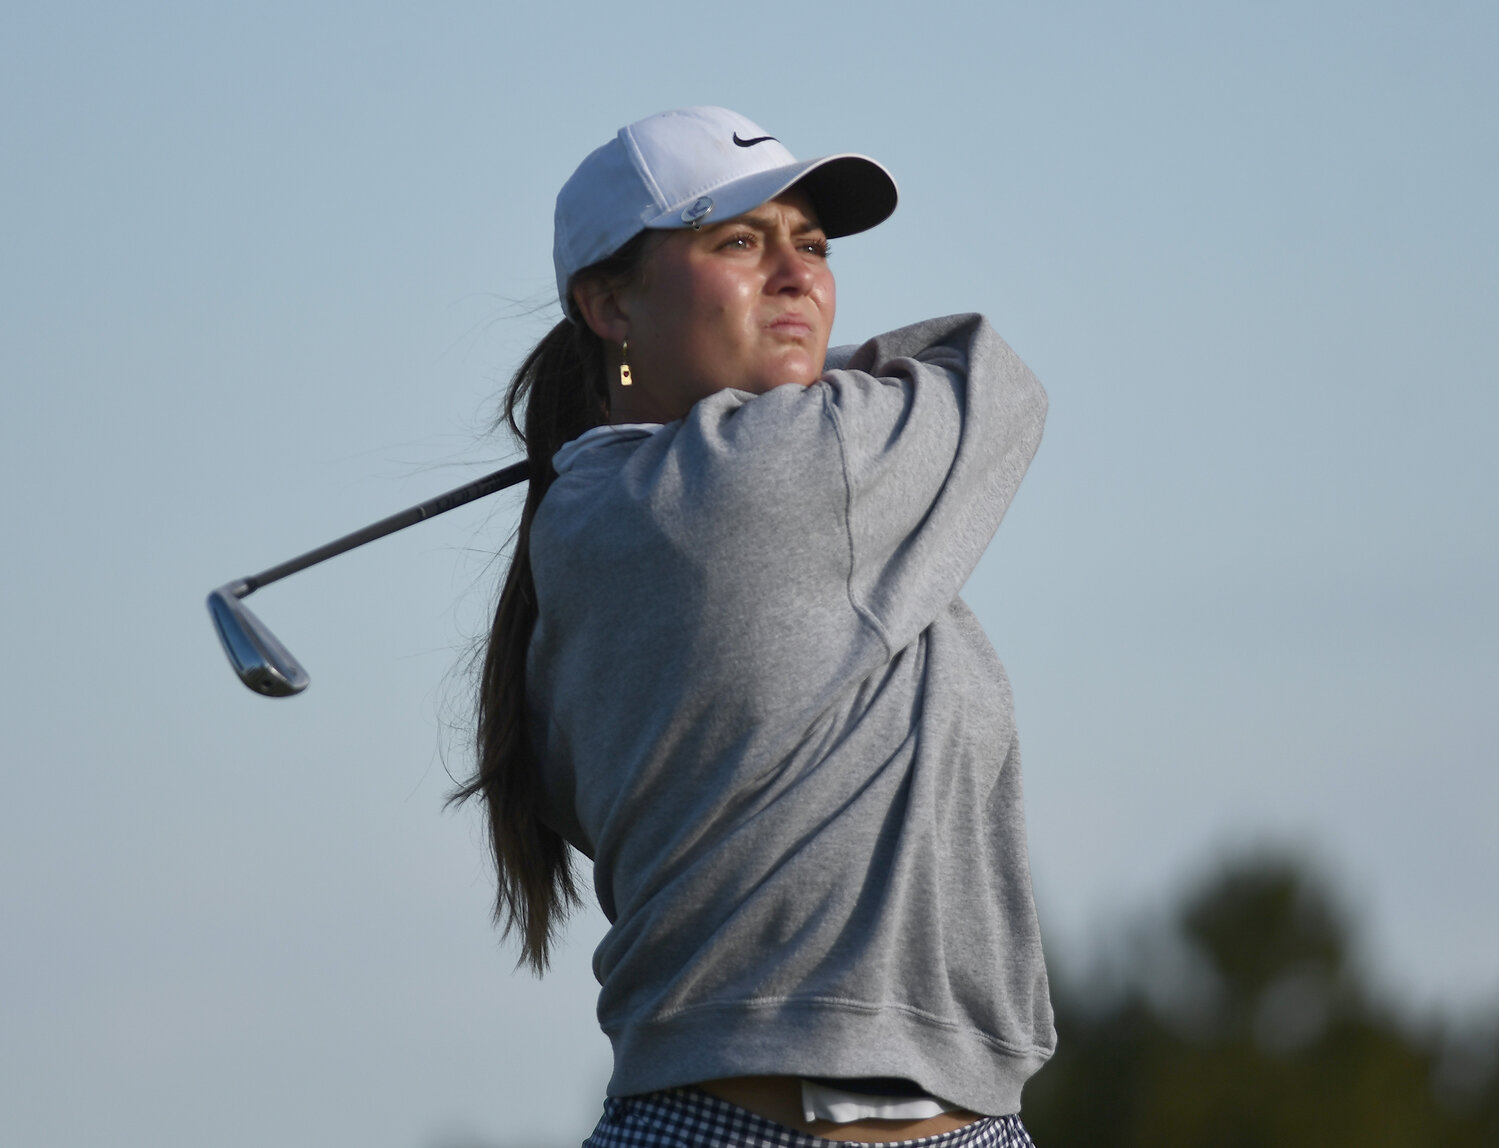 Evanston's Kyra Sponenburgh – who golfs for Westminster University – placed seventh in the Women's Division of the WSGA Amateur Championship.